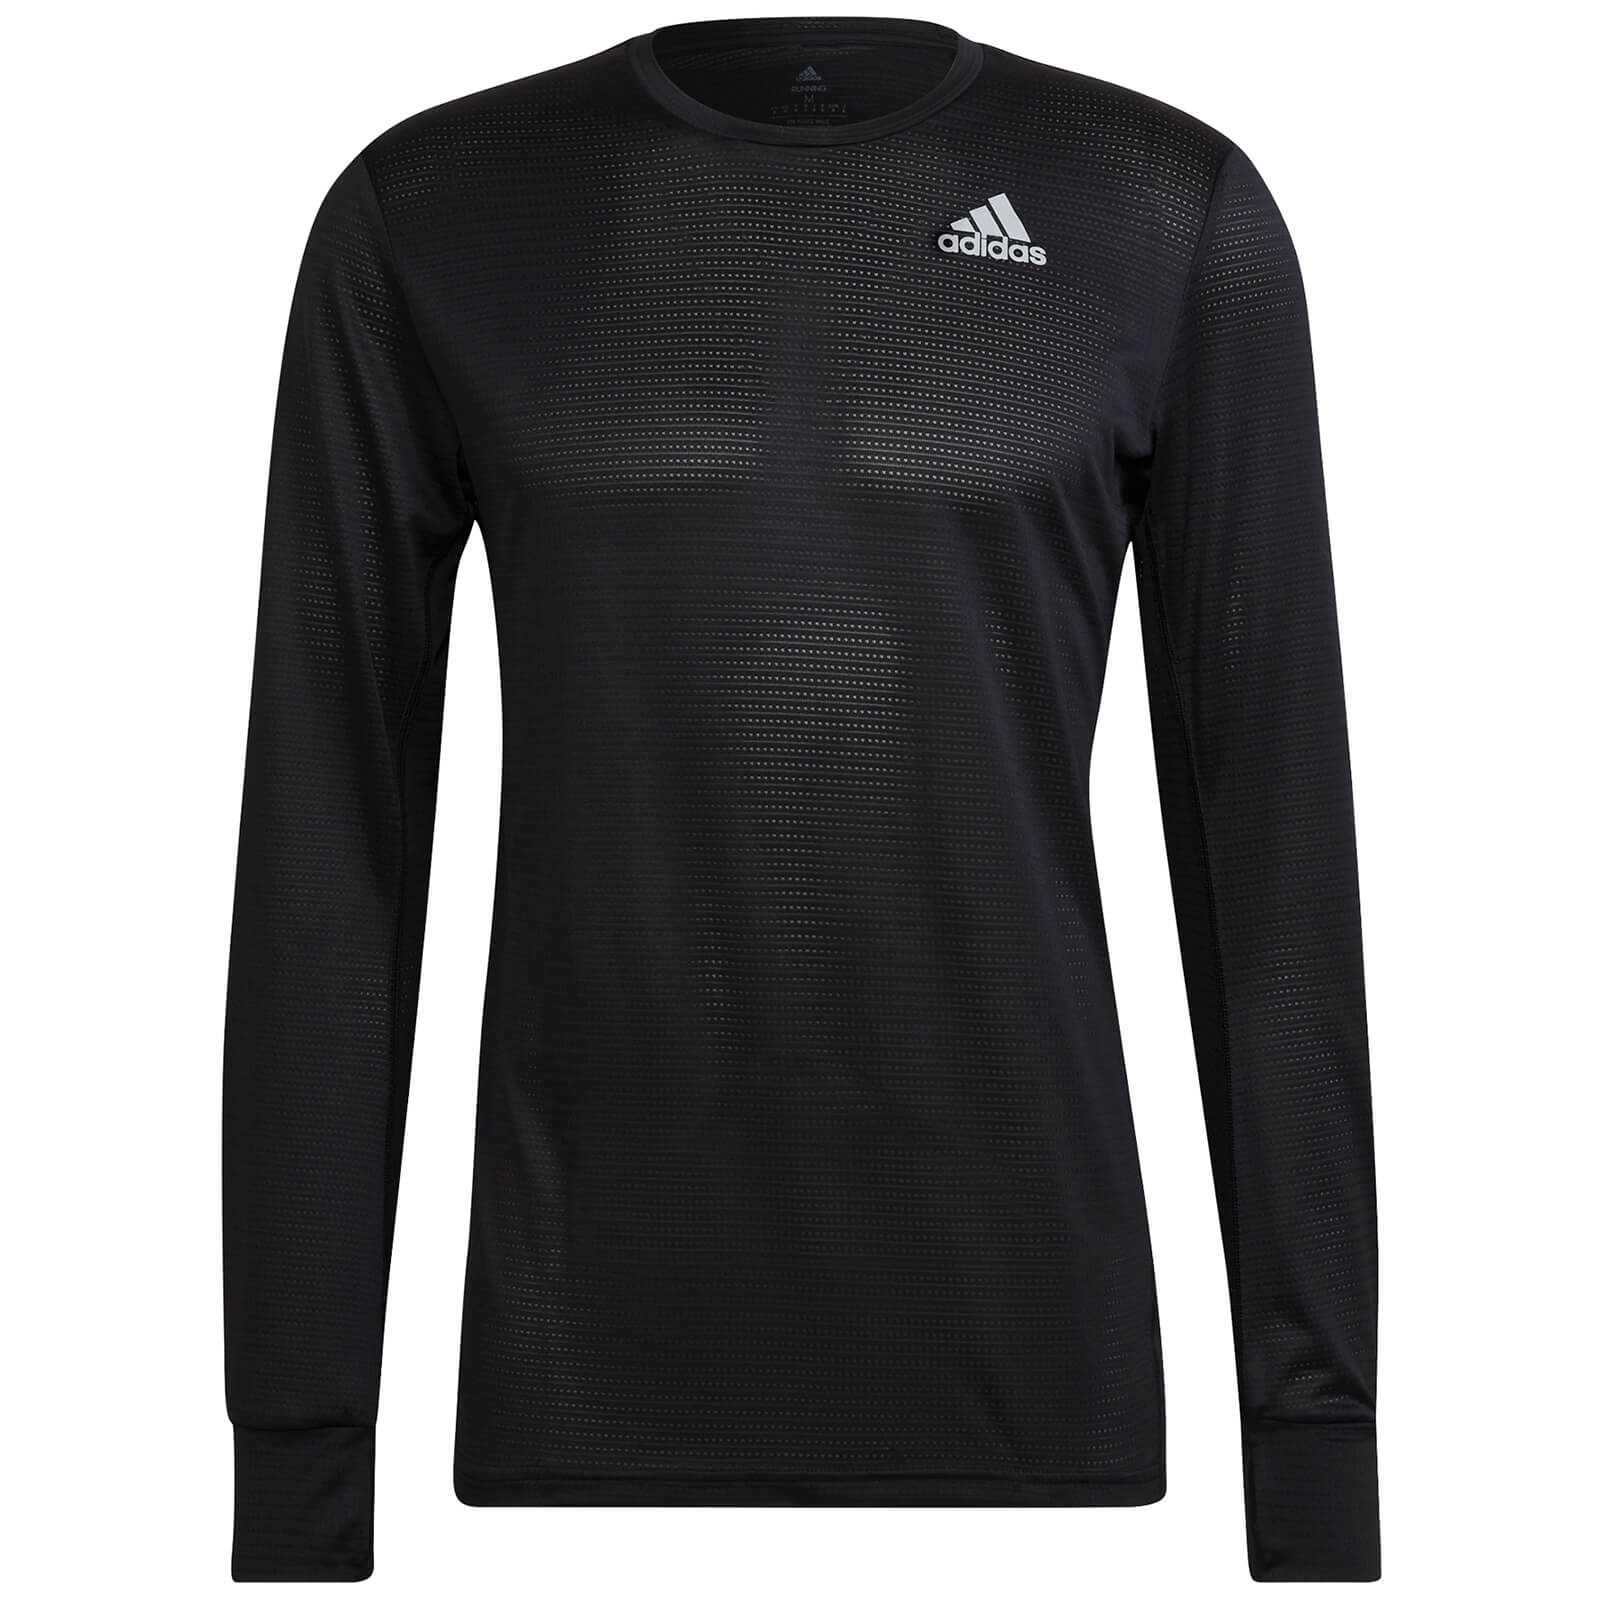 Image of adidas Own The Run Long Sleeve T-Shirt - Black/Reflective Silver - S